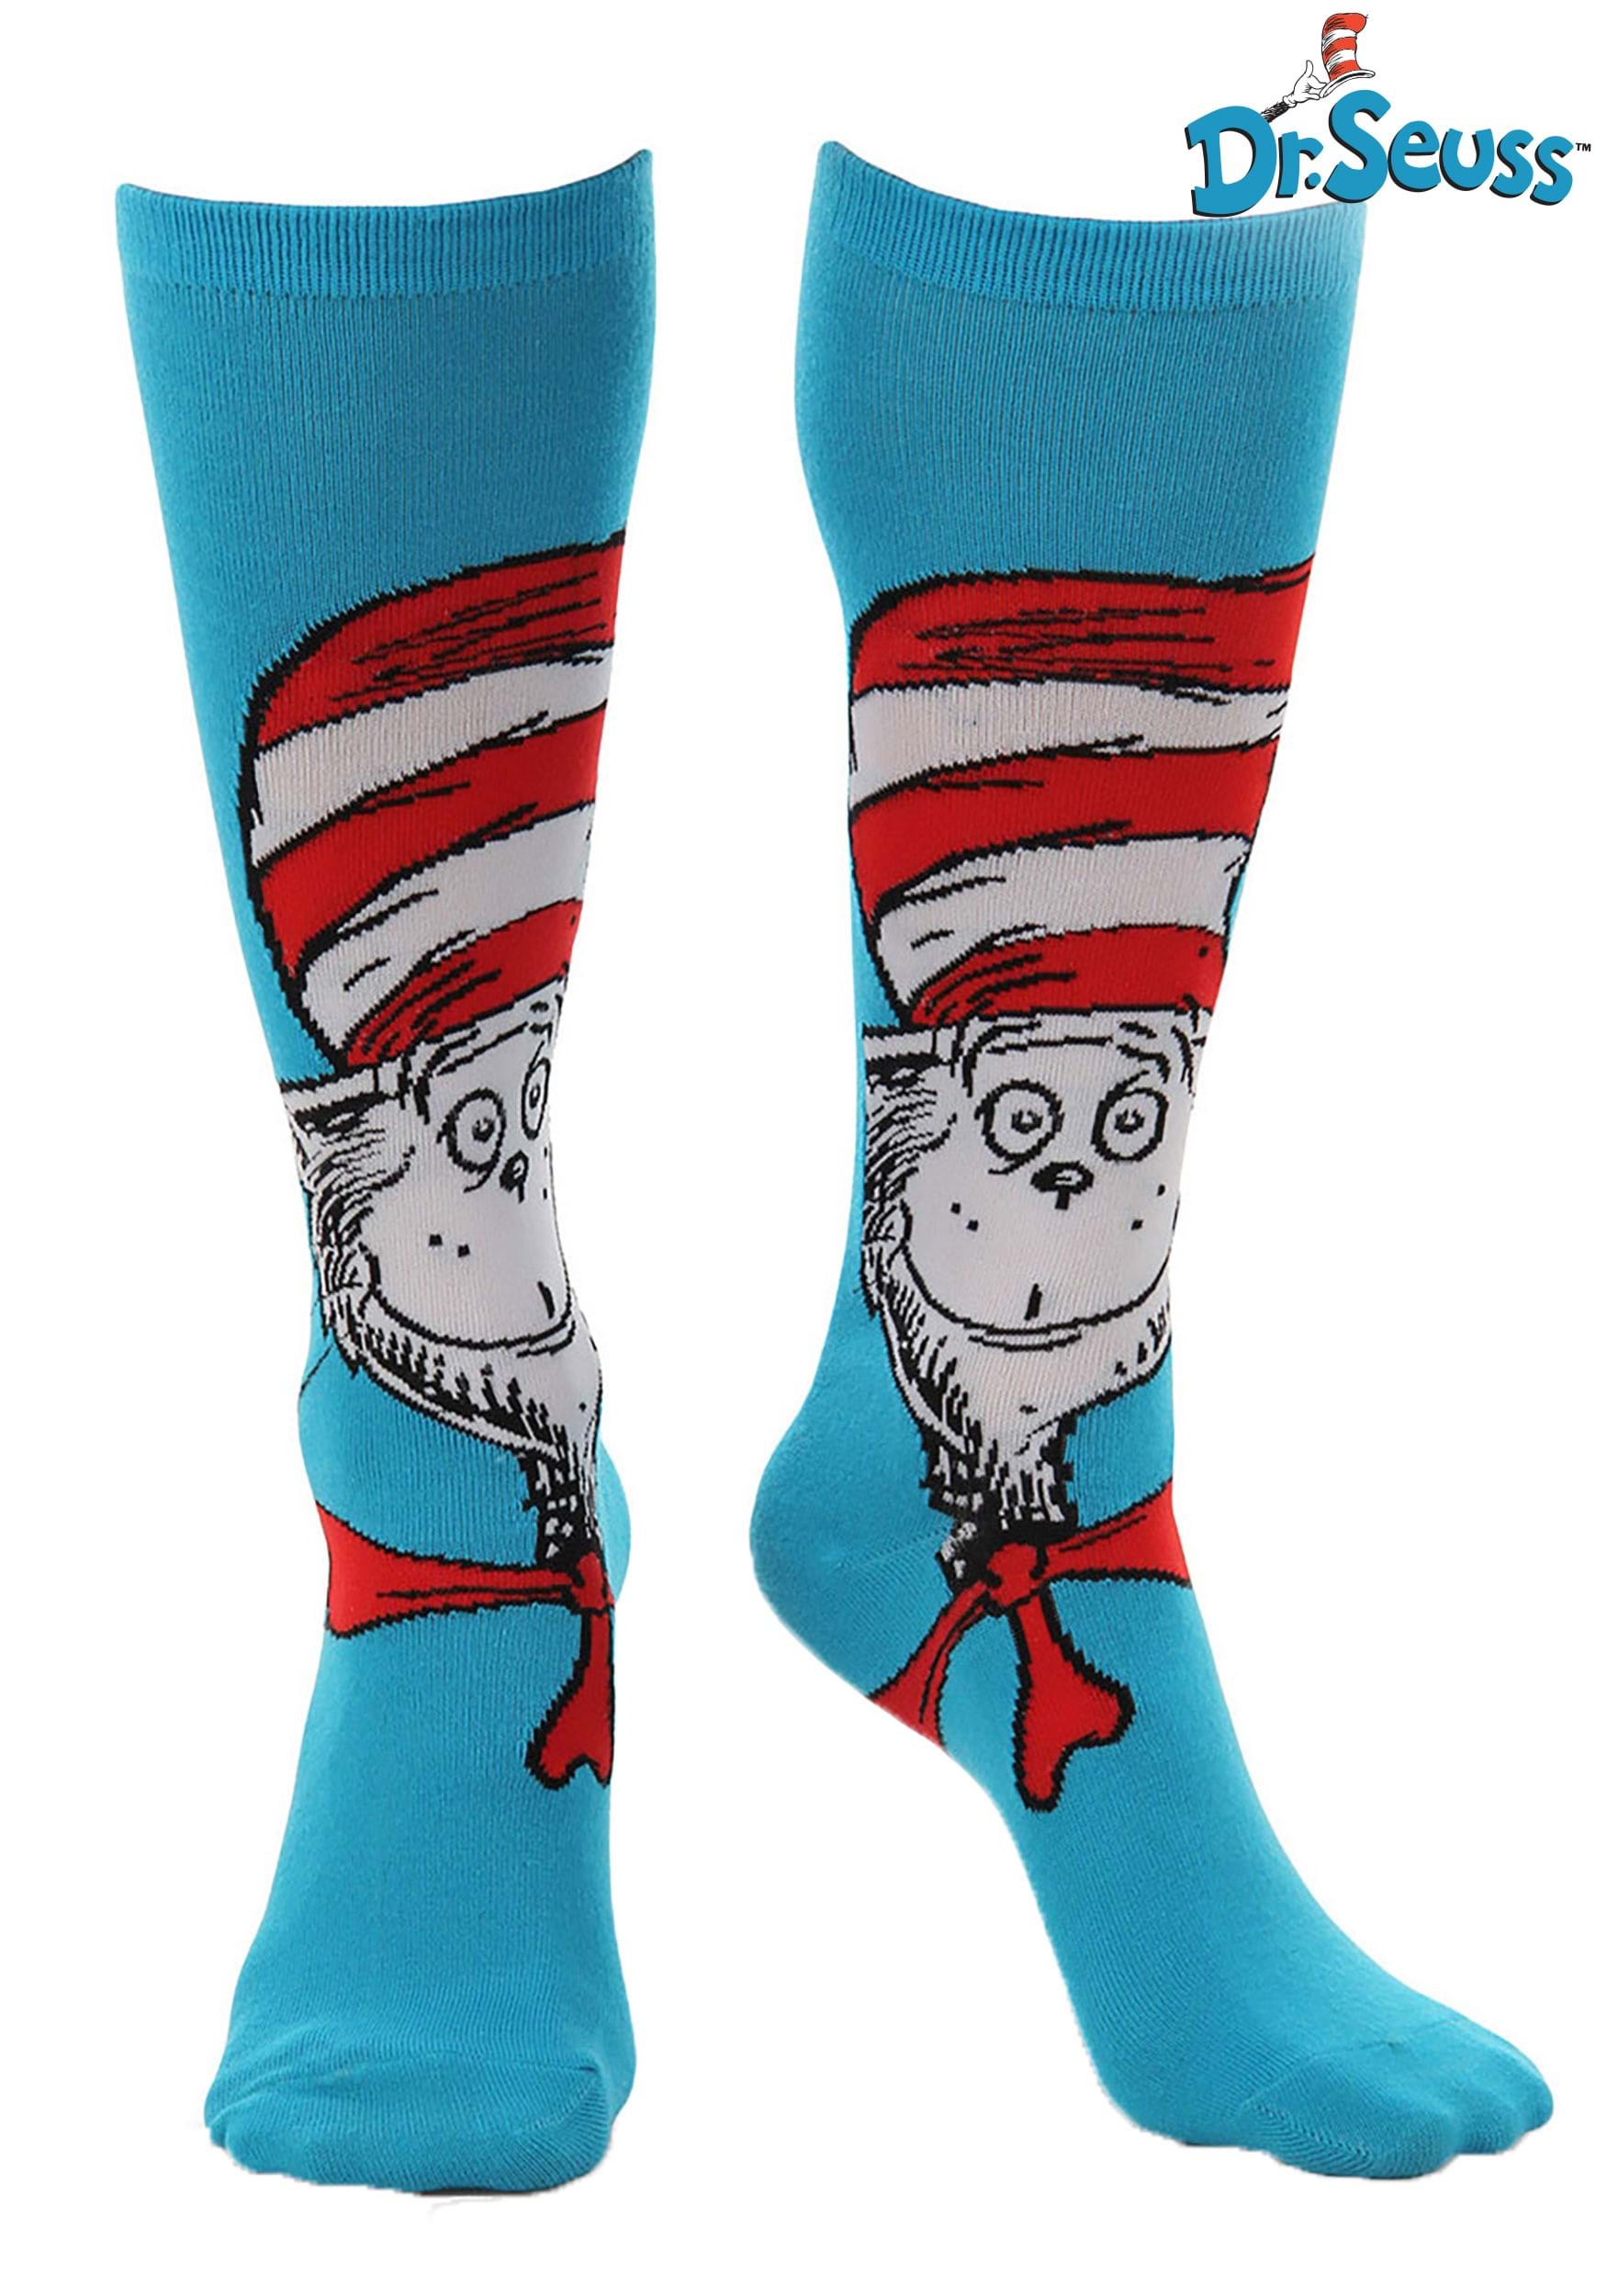 The Cat in the Hat Knee High Costume Socks